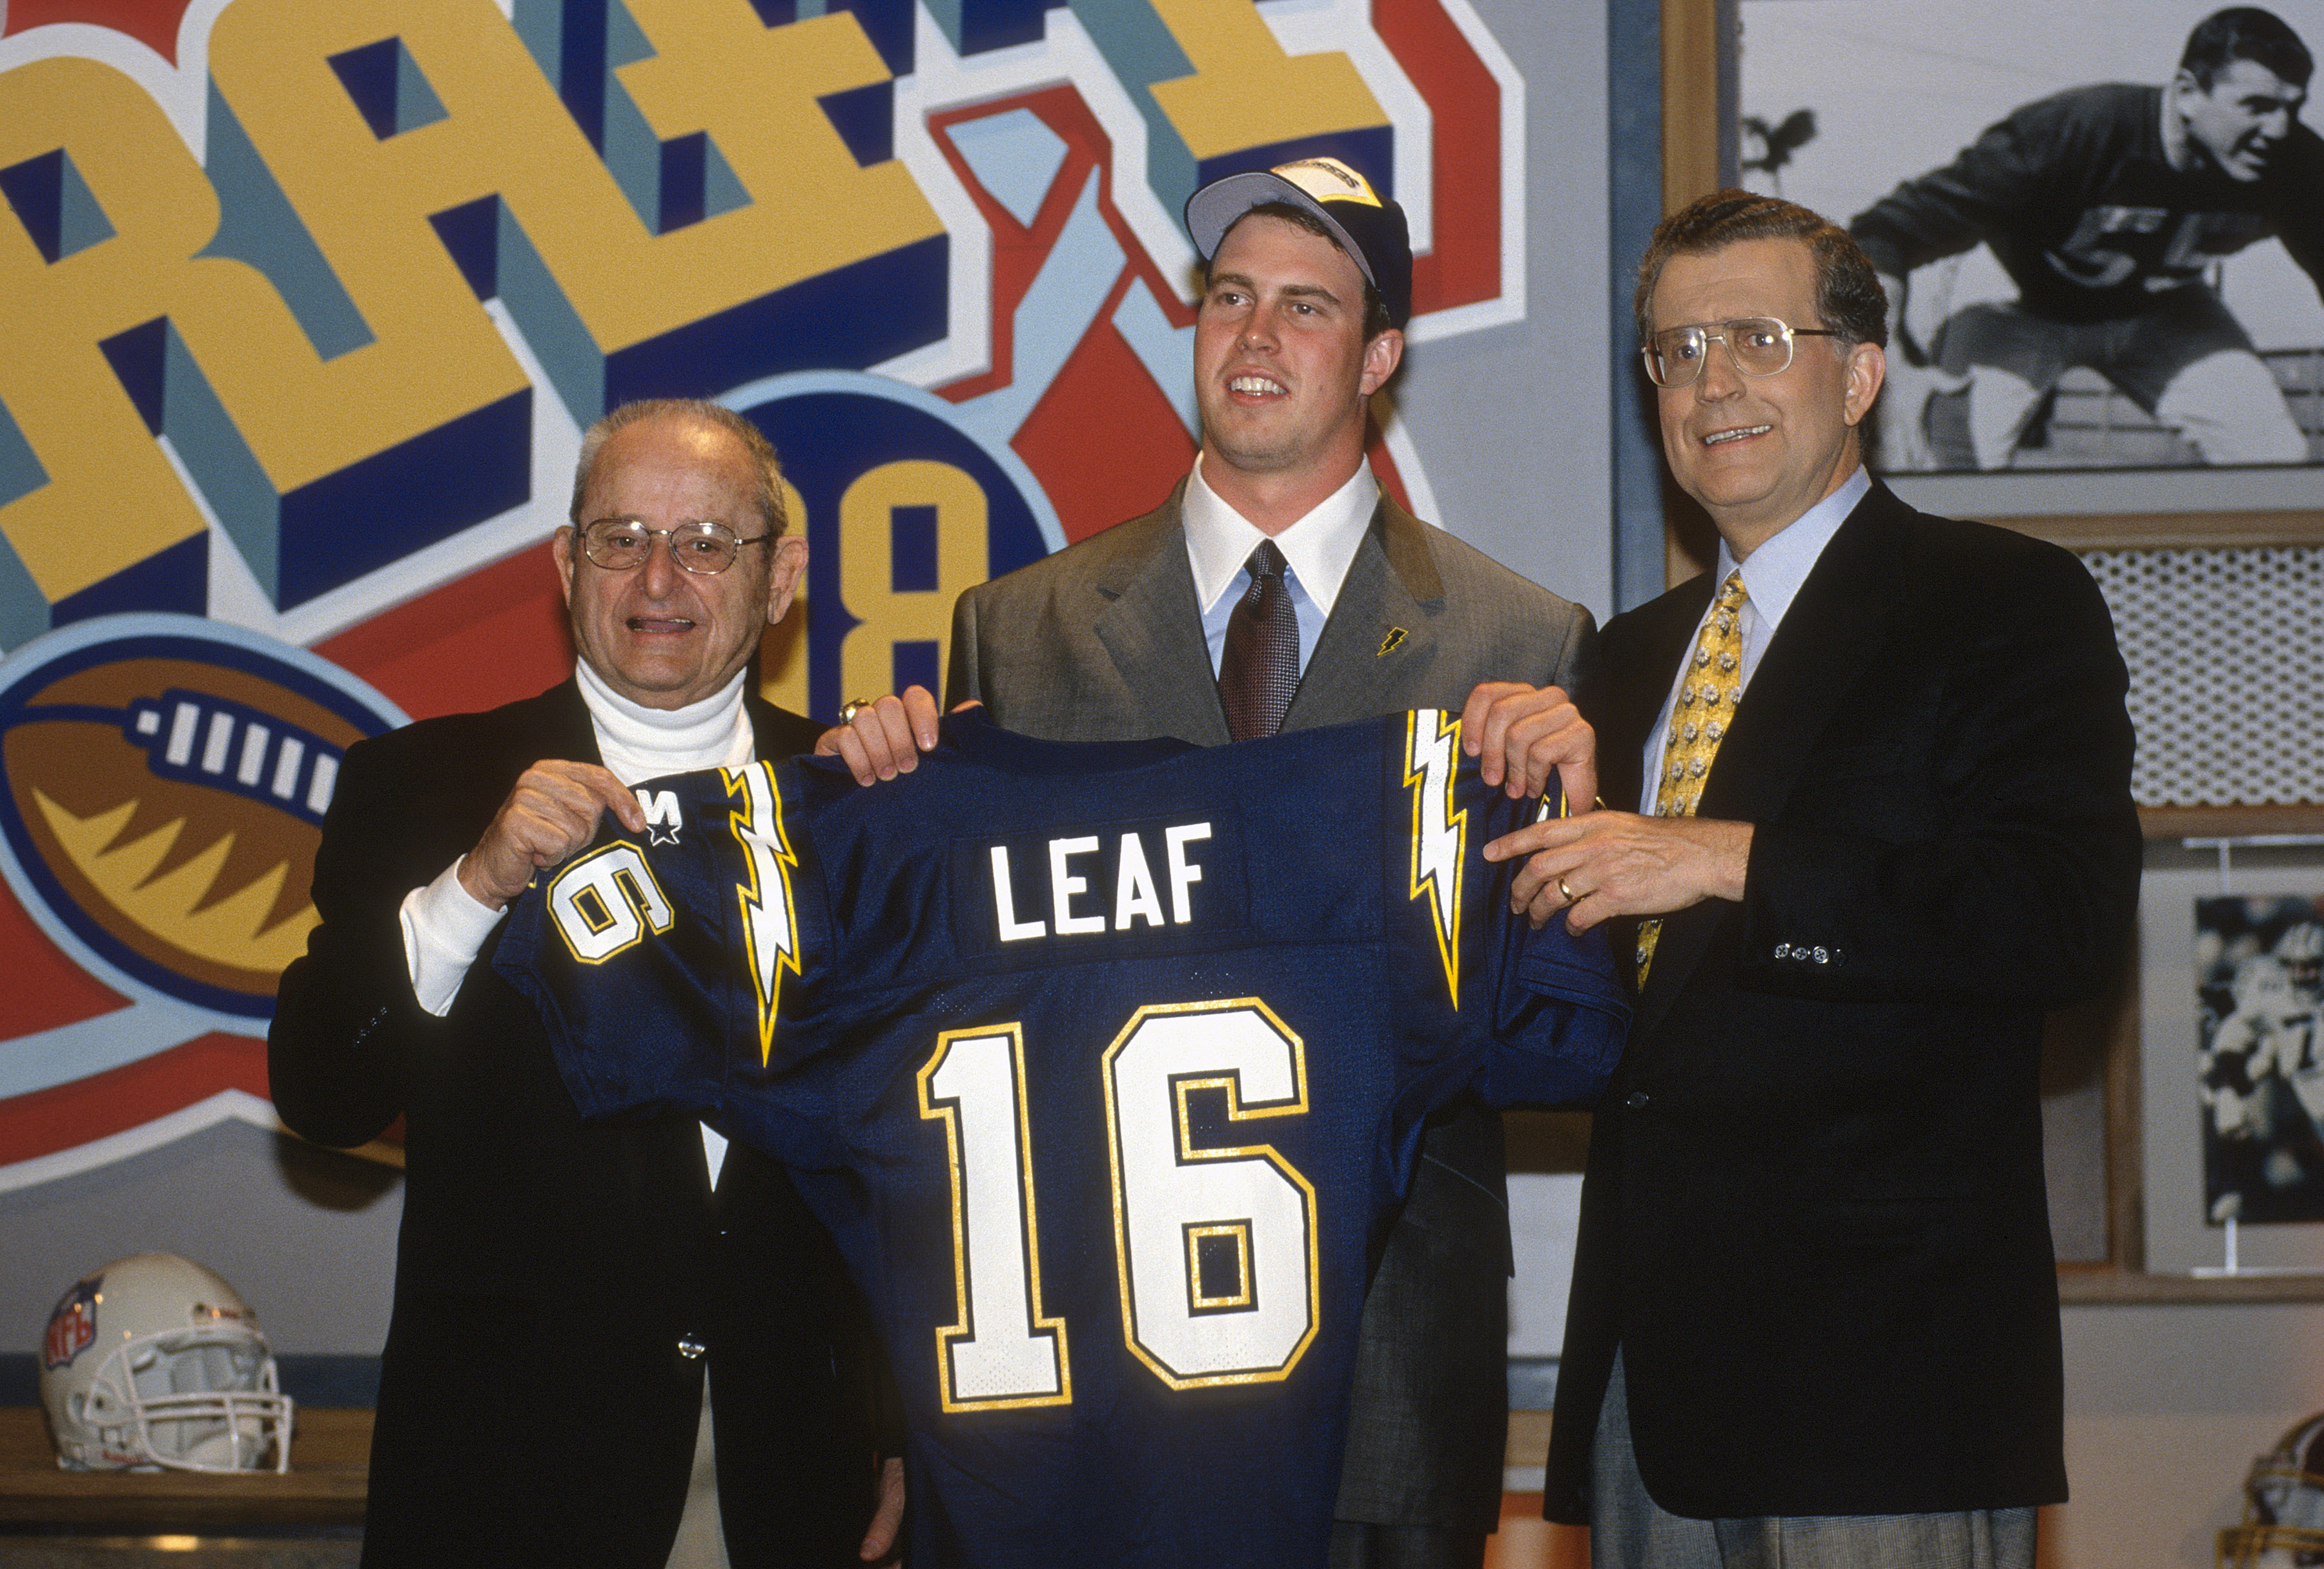 From Jackass to Likeable: The Remaking of Ryan Leaf